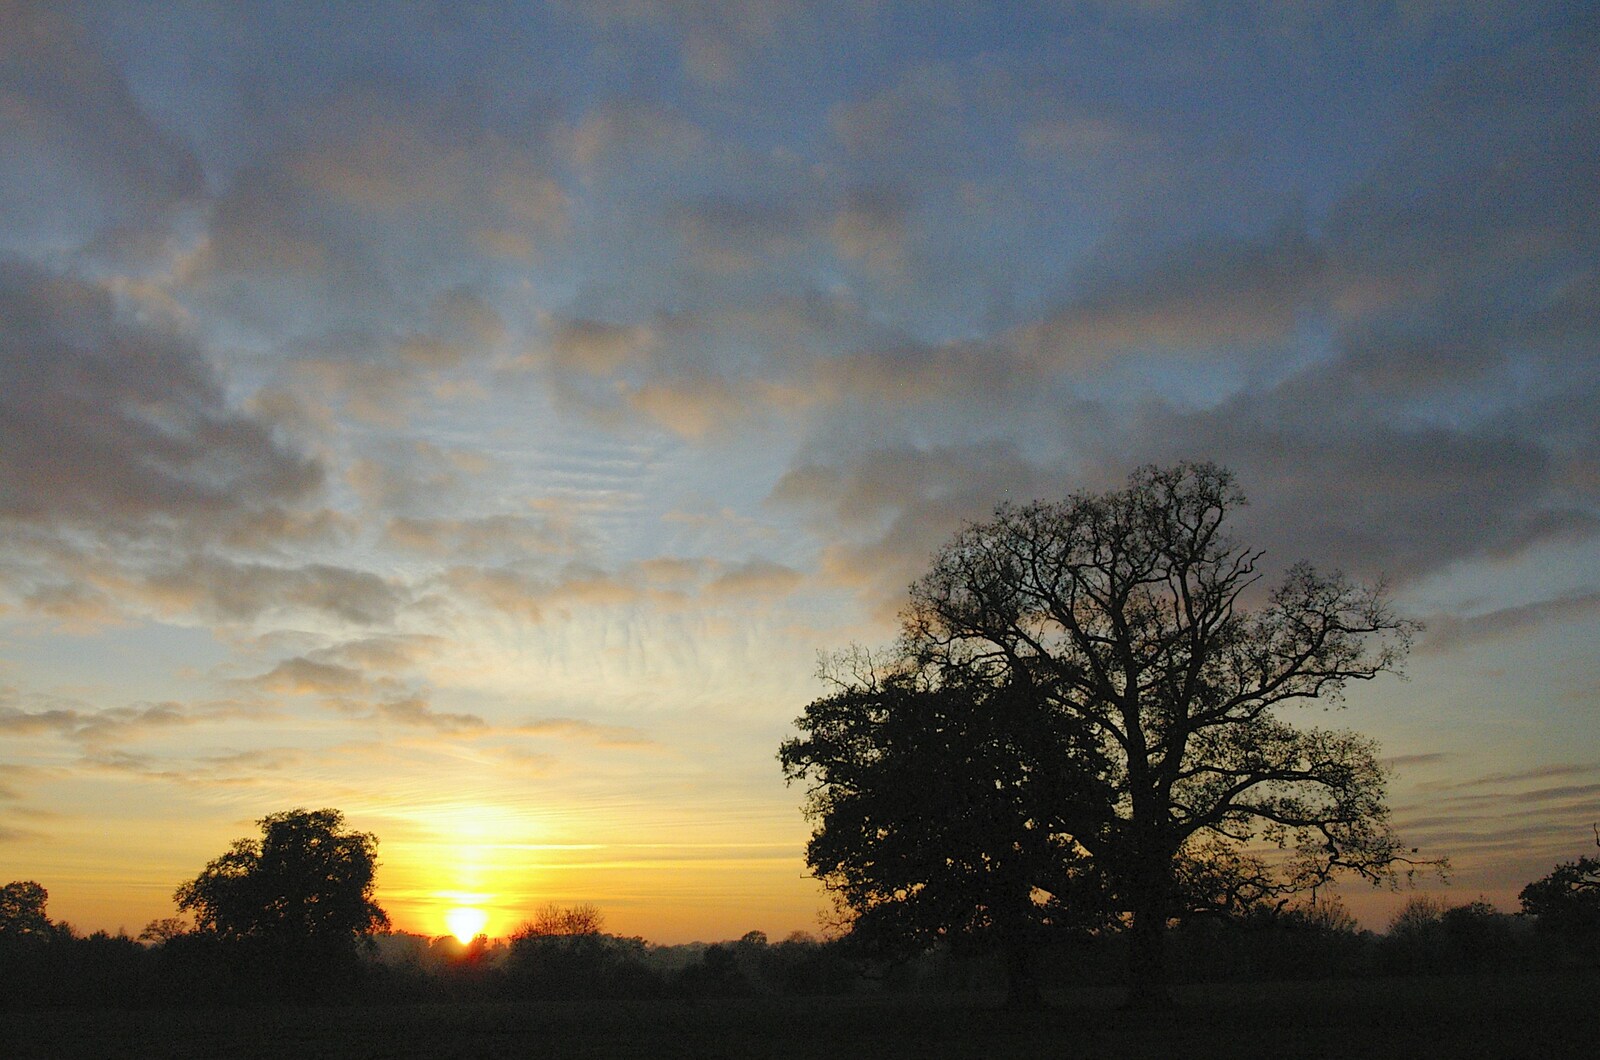 A sunset over Thornham from Thornham Walled Garden, and Bob Last Leaves the Lab, Cambridge - 20th November 2005